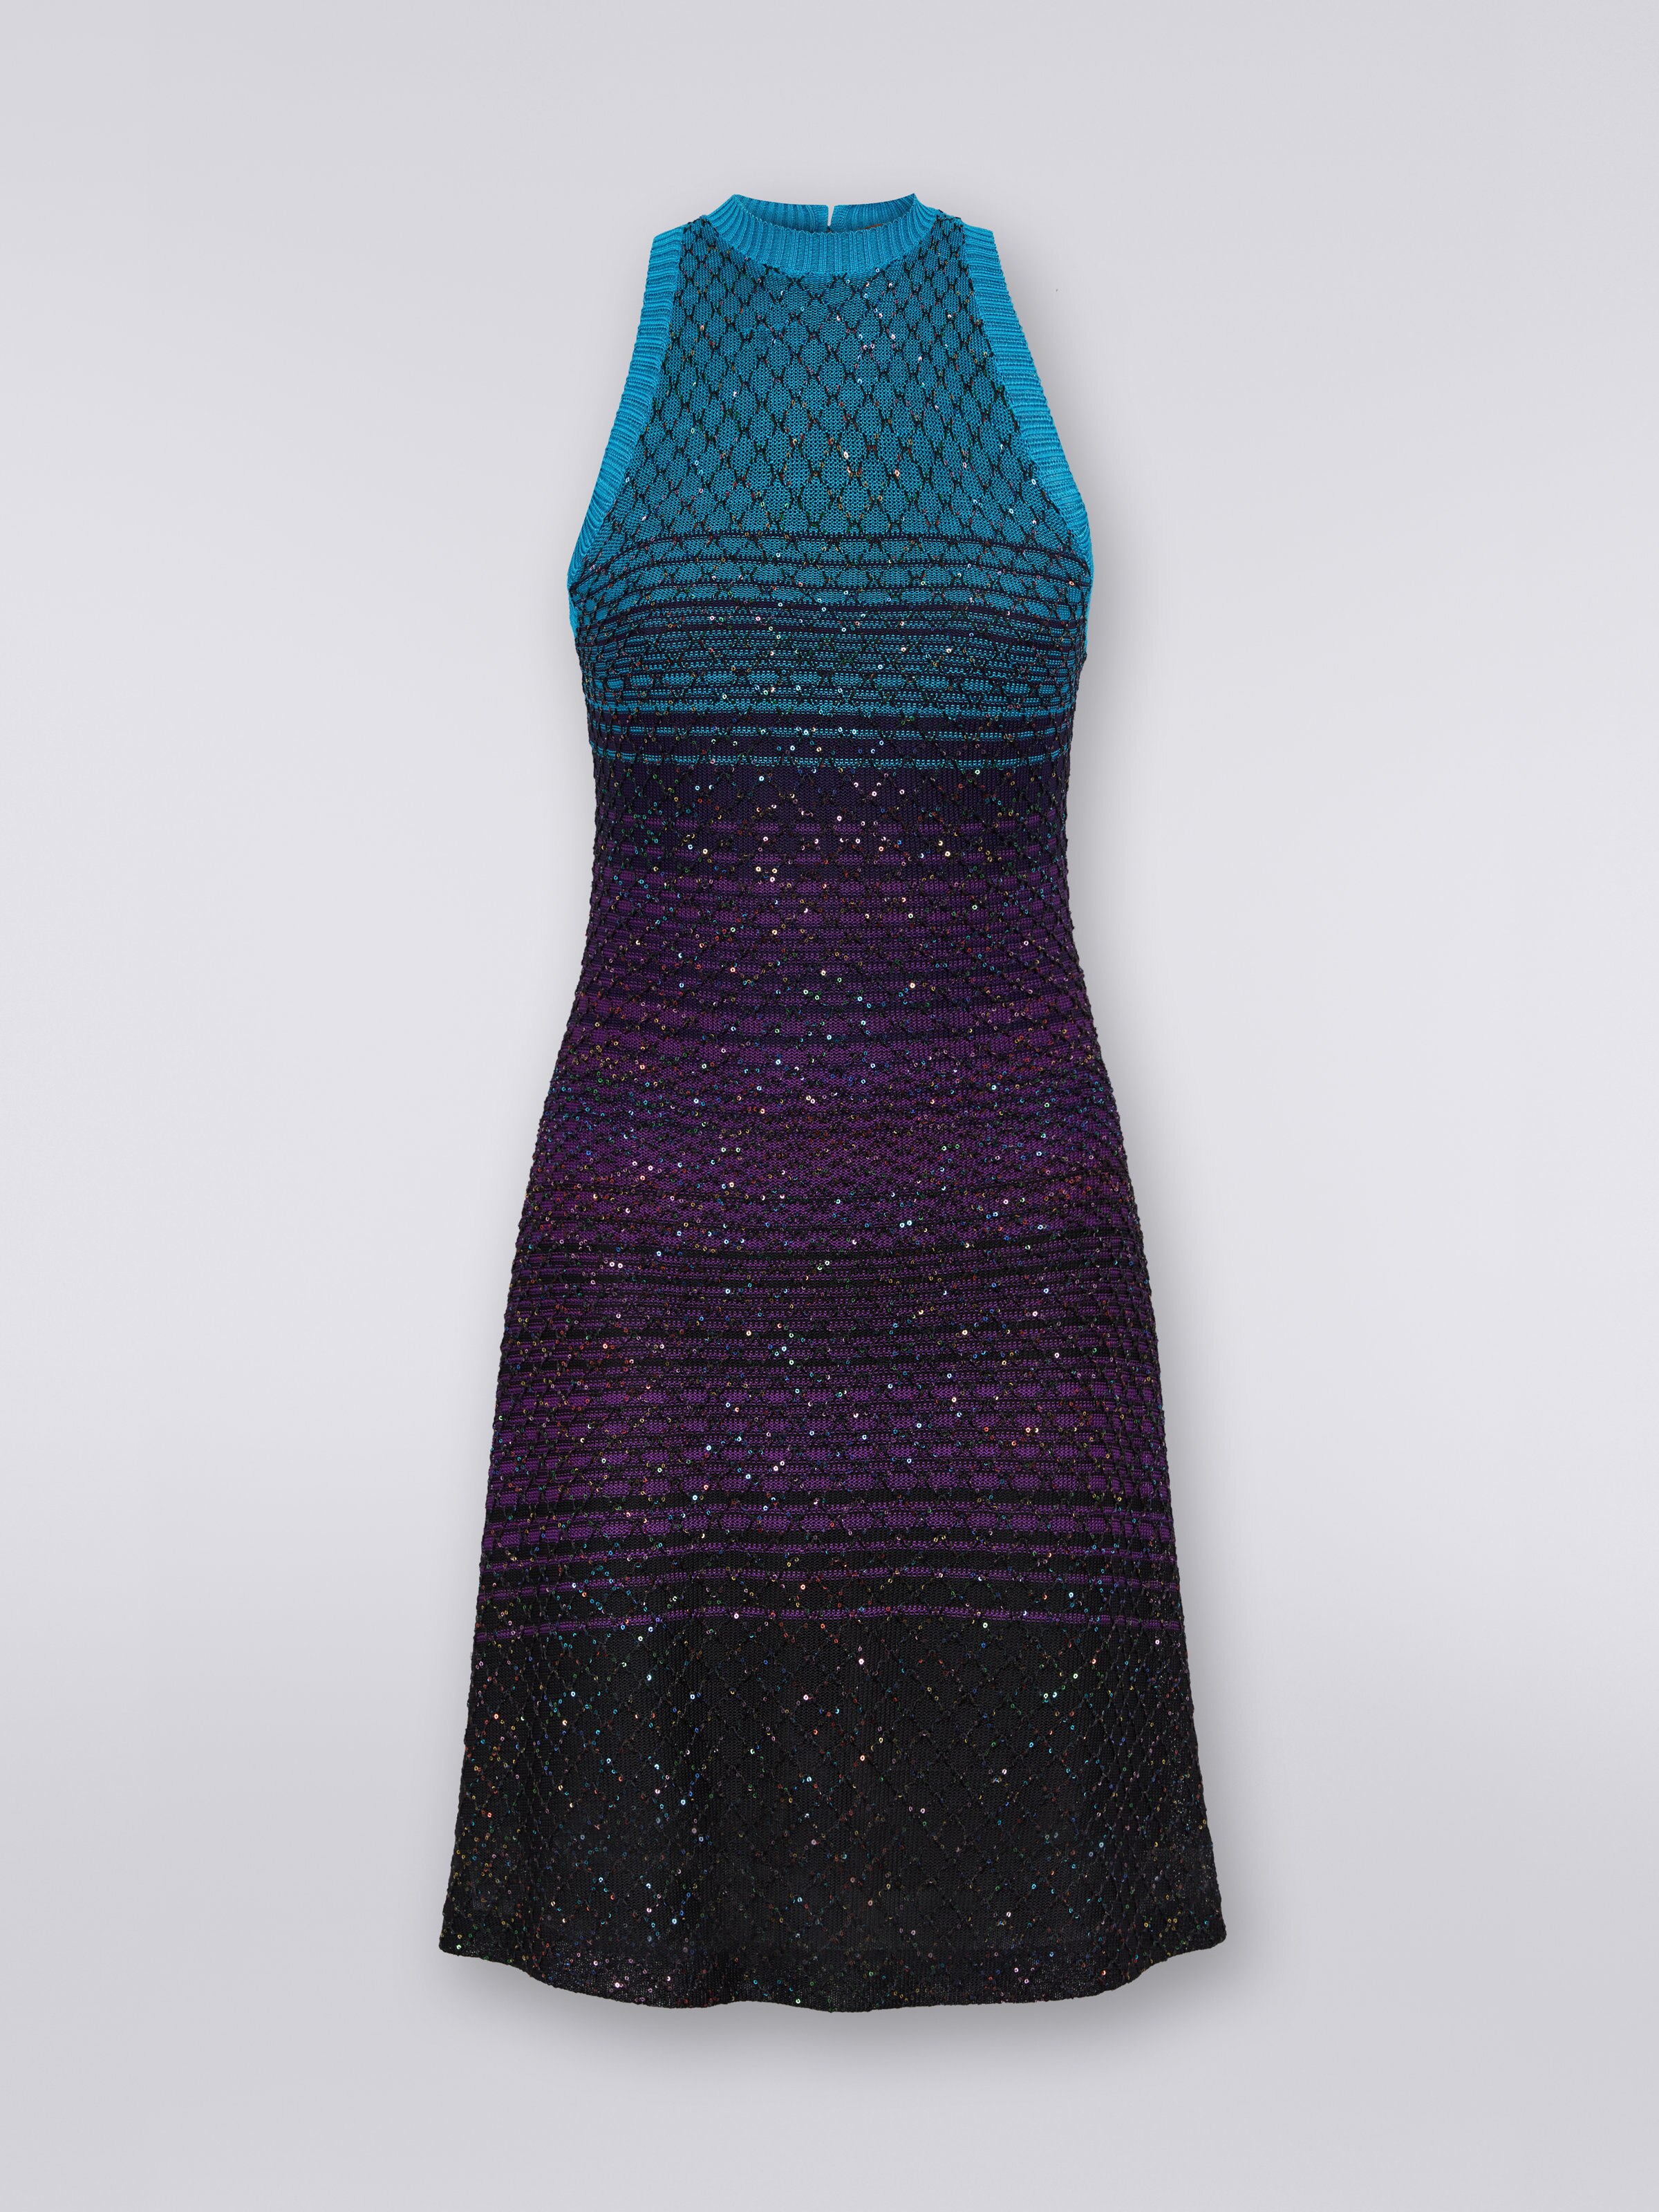 Sleeveless mesh dress with sequins, Turquoise, Purple & Black - 0